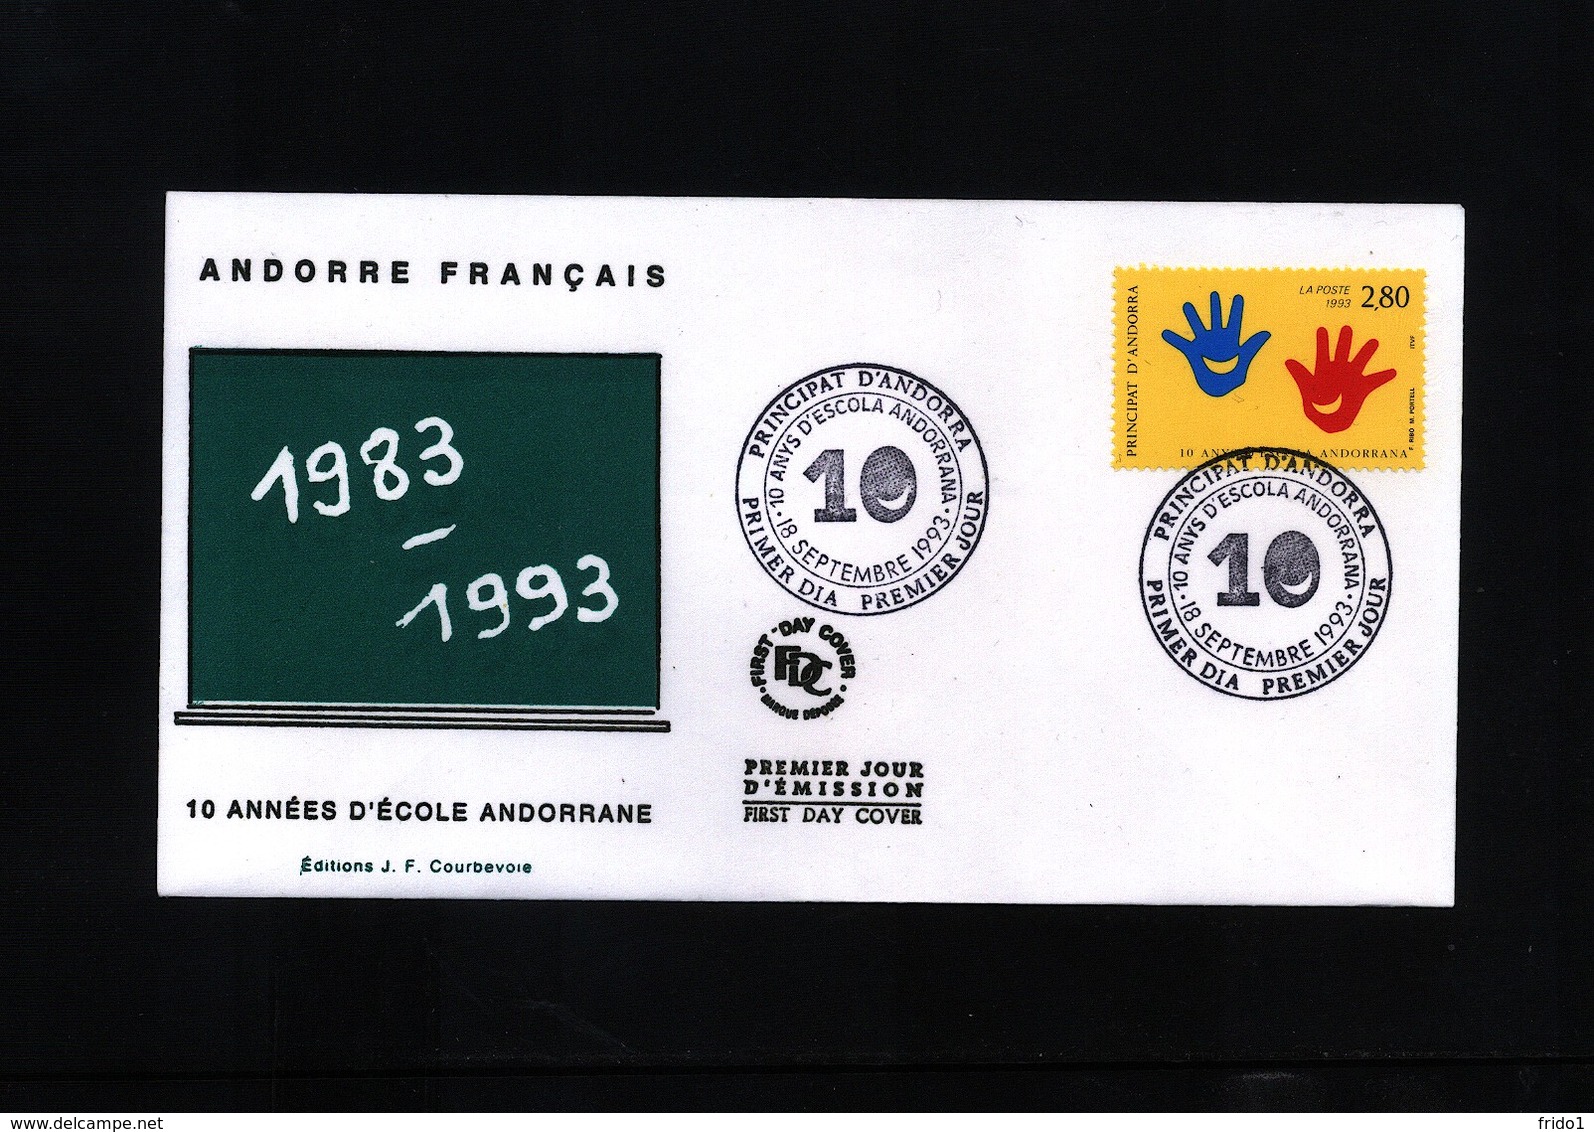 Andorra French 1993 Michel 459 FDC - Covers & Documents